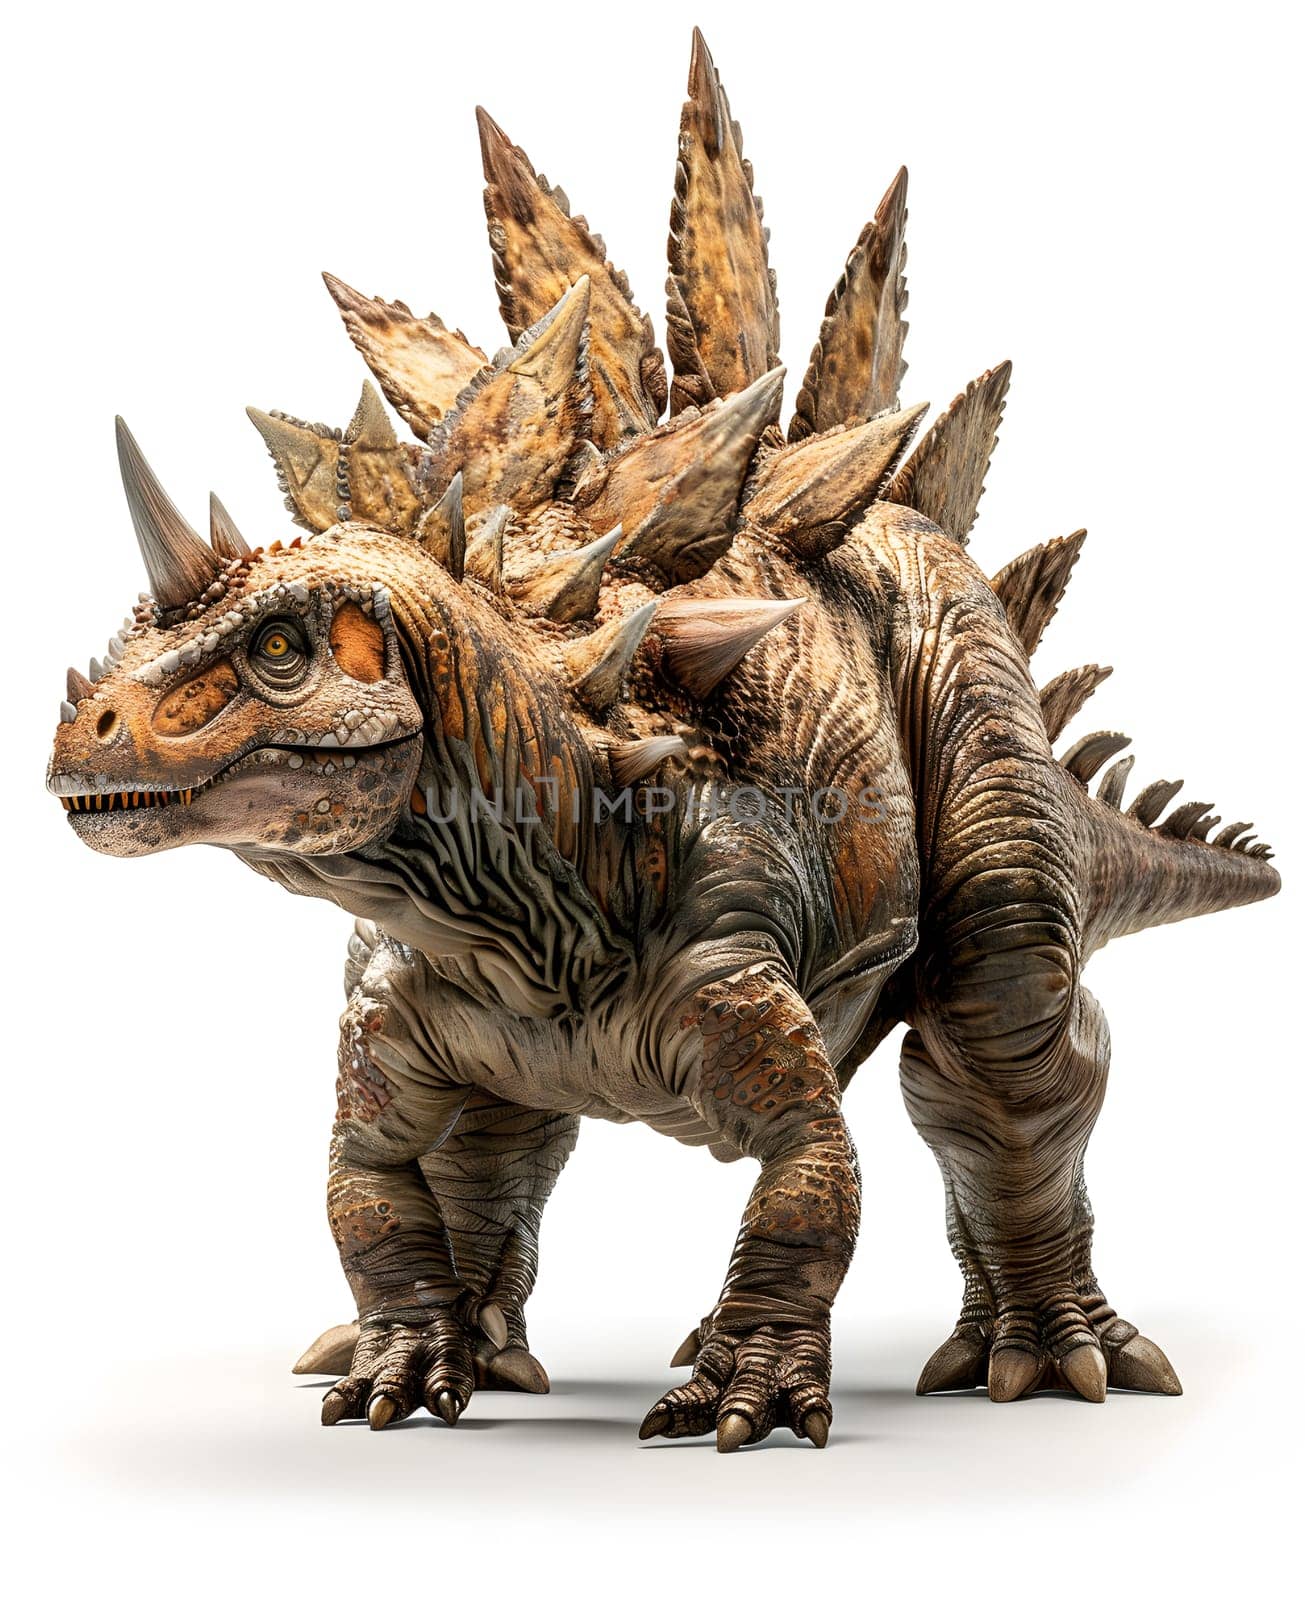 Dinosaur toy with horns, resembling Ankylosaurus, on white background by Nadtochiy